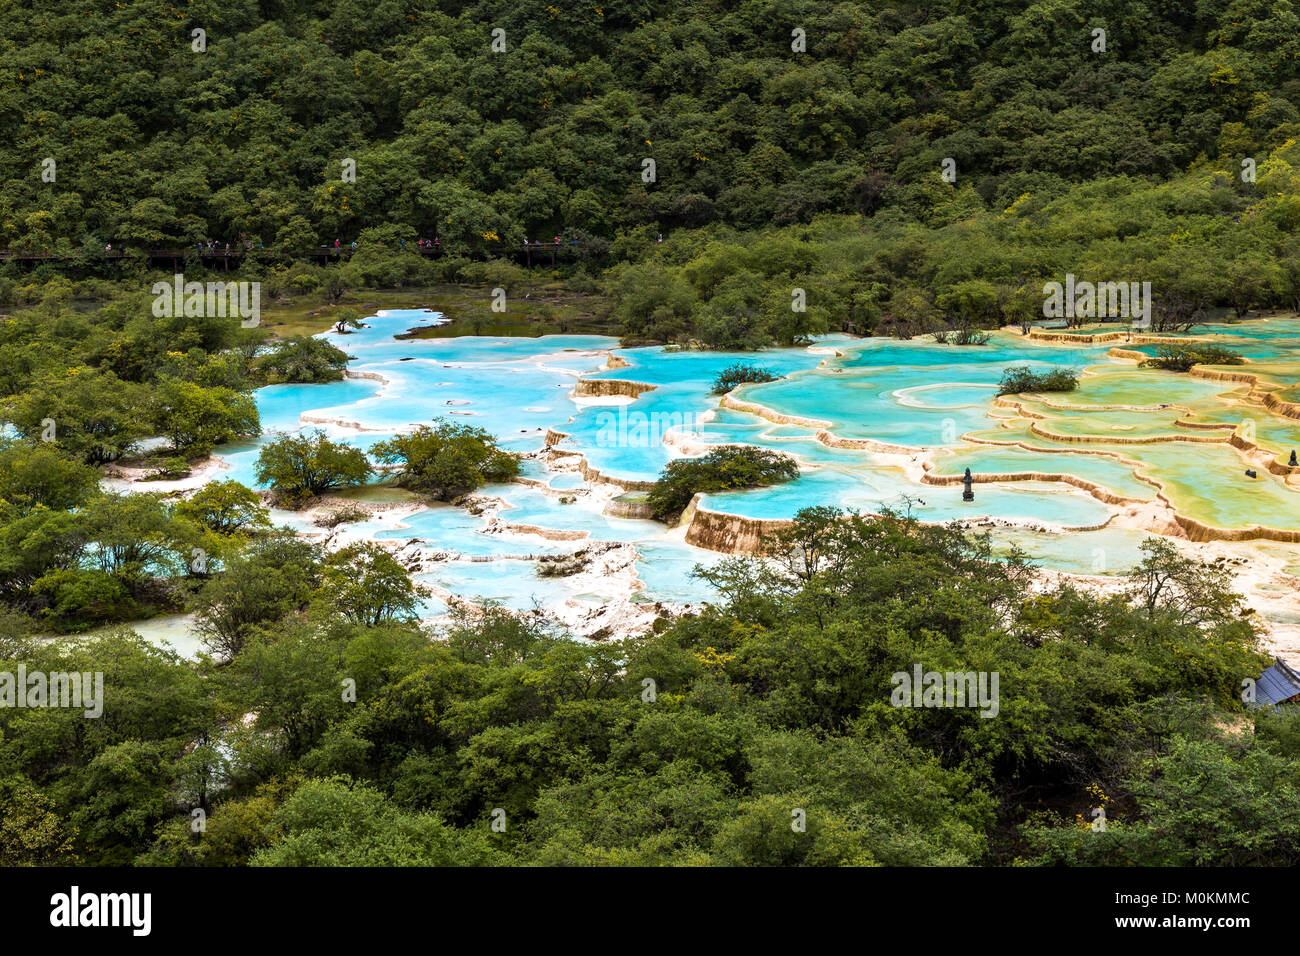 Huanglong National Park, Sichuan, China, famous for its colorful pools formed by calcite deposits. Multi-colored Pond in the picture is the world's la Stock Photo